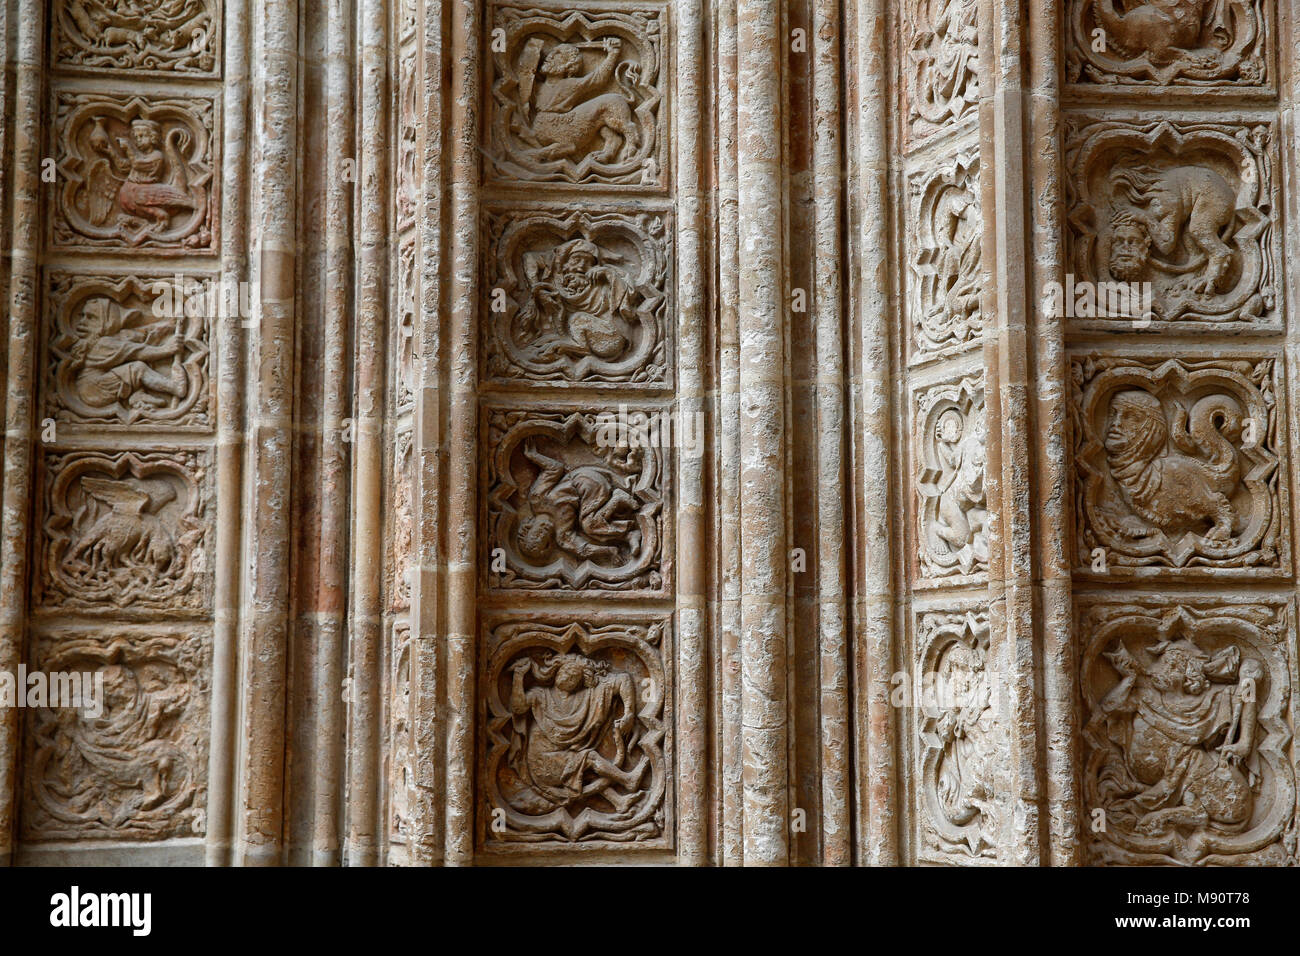 Notre-Dame cathedral, Rouen, France. Reliefs. Stock Photo